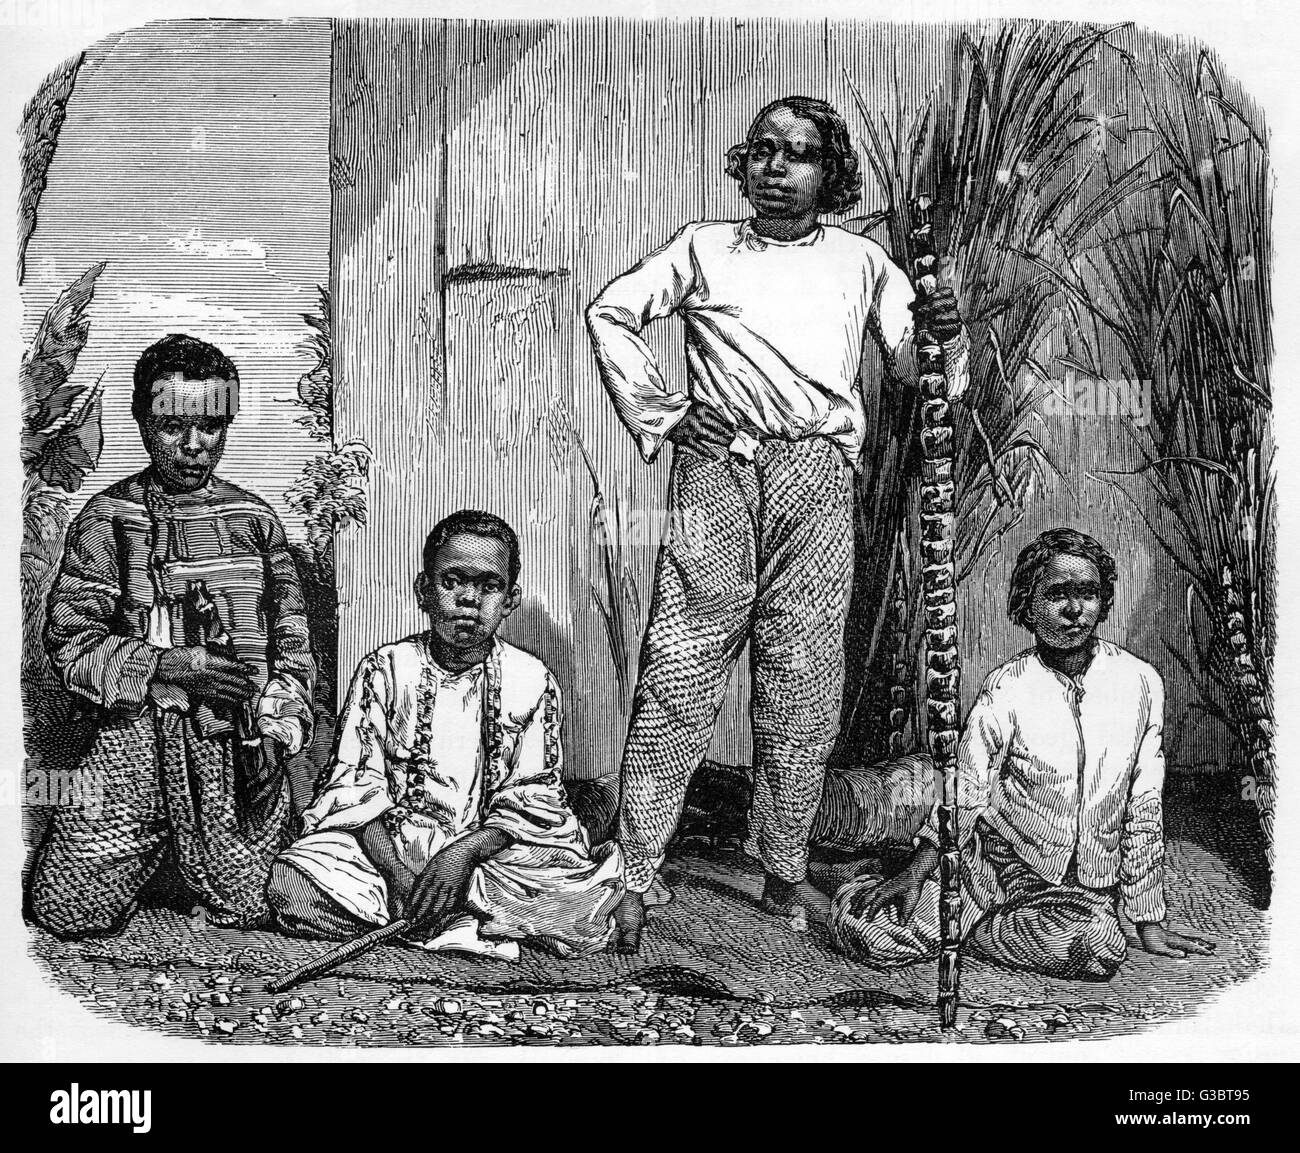 Natives of the Island of Reunion - Indian Ocean Stock Photo